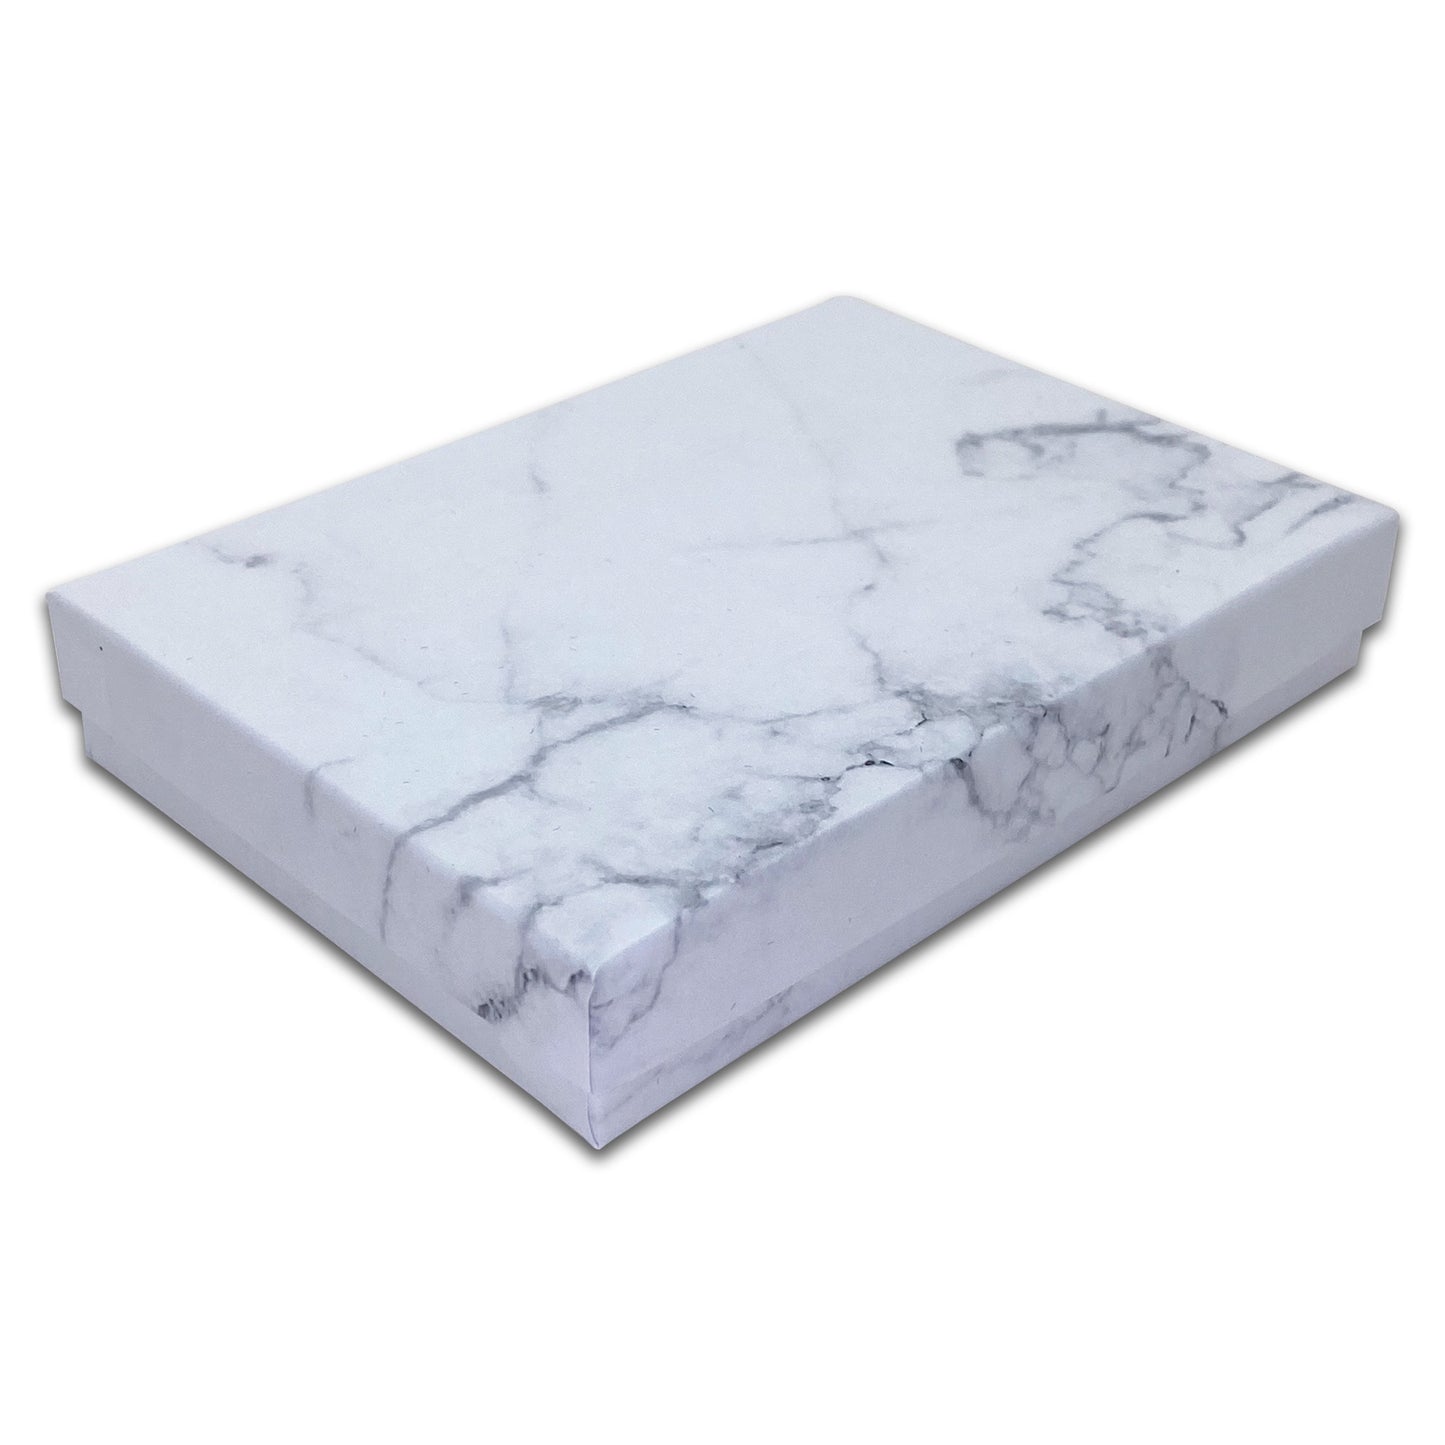 5 7/16" x 3 15/16" Marble White Necklace Paper Box with Black Foam Insert